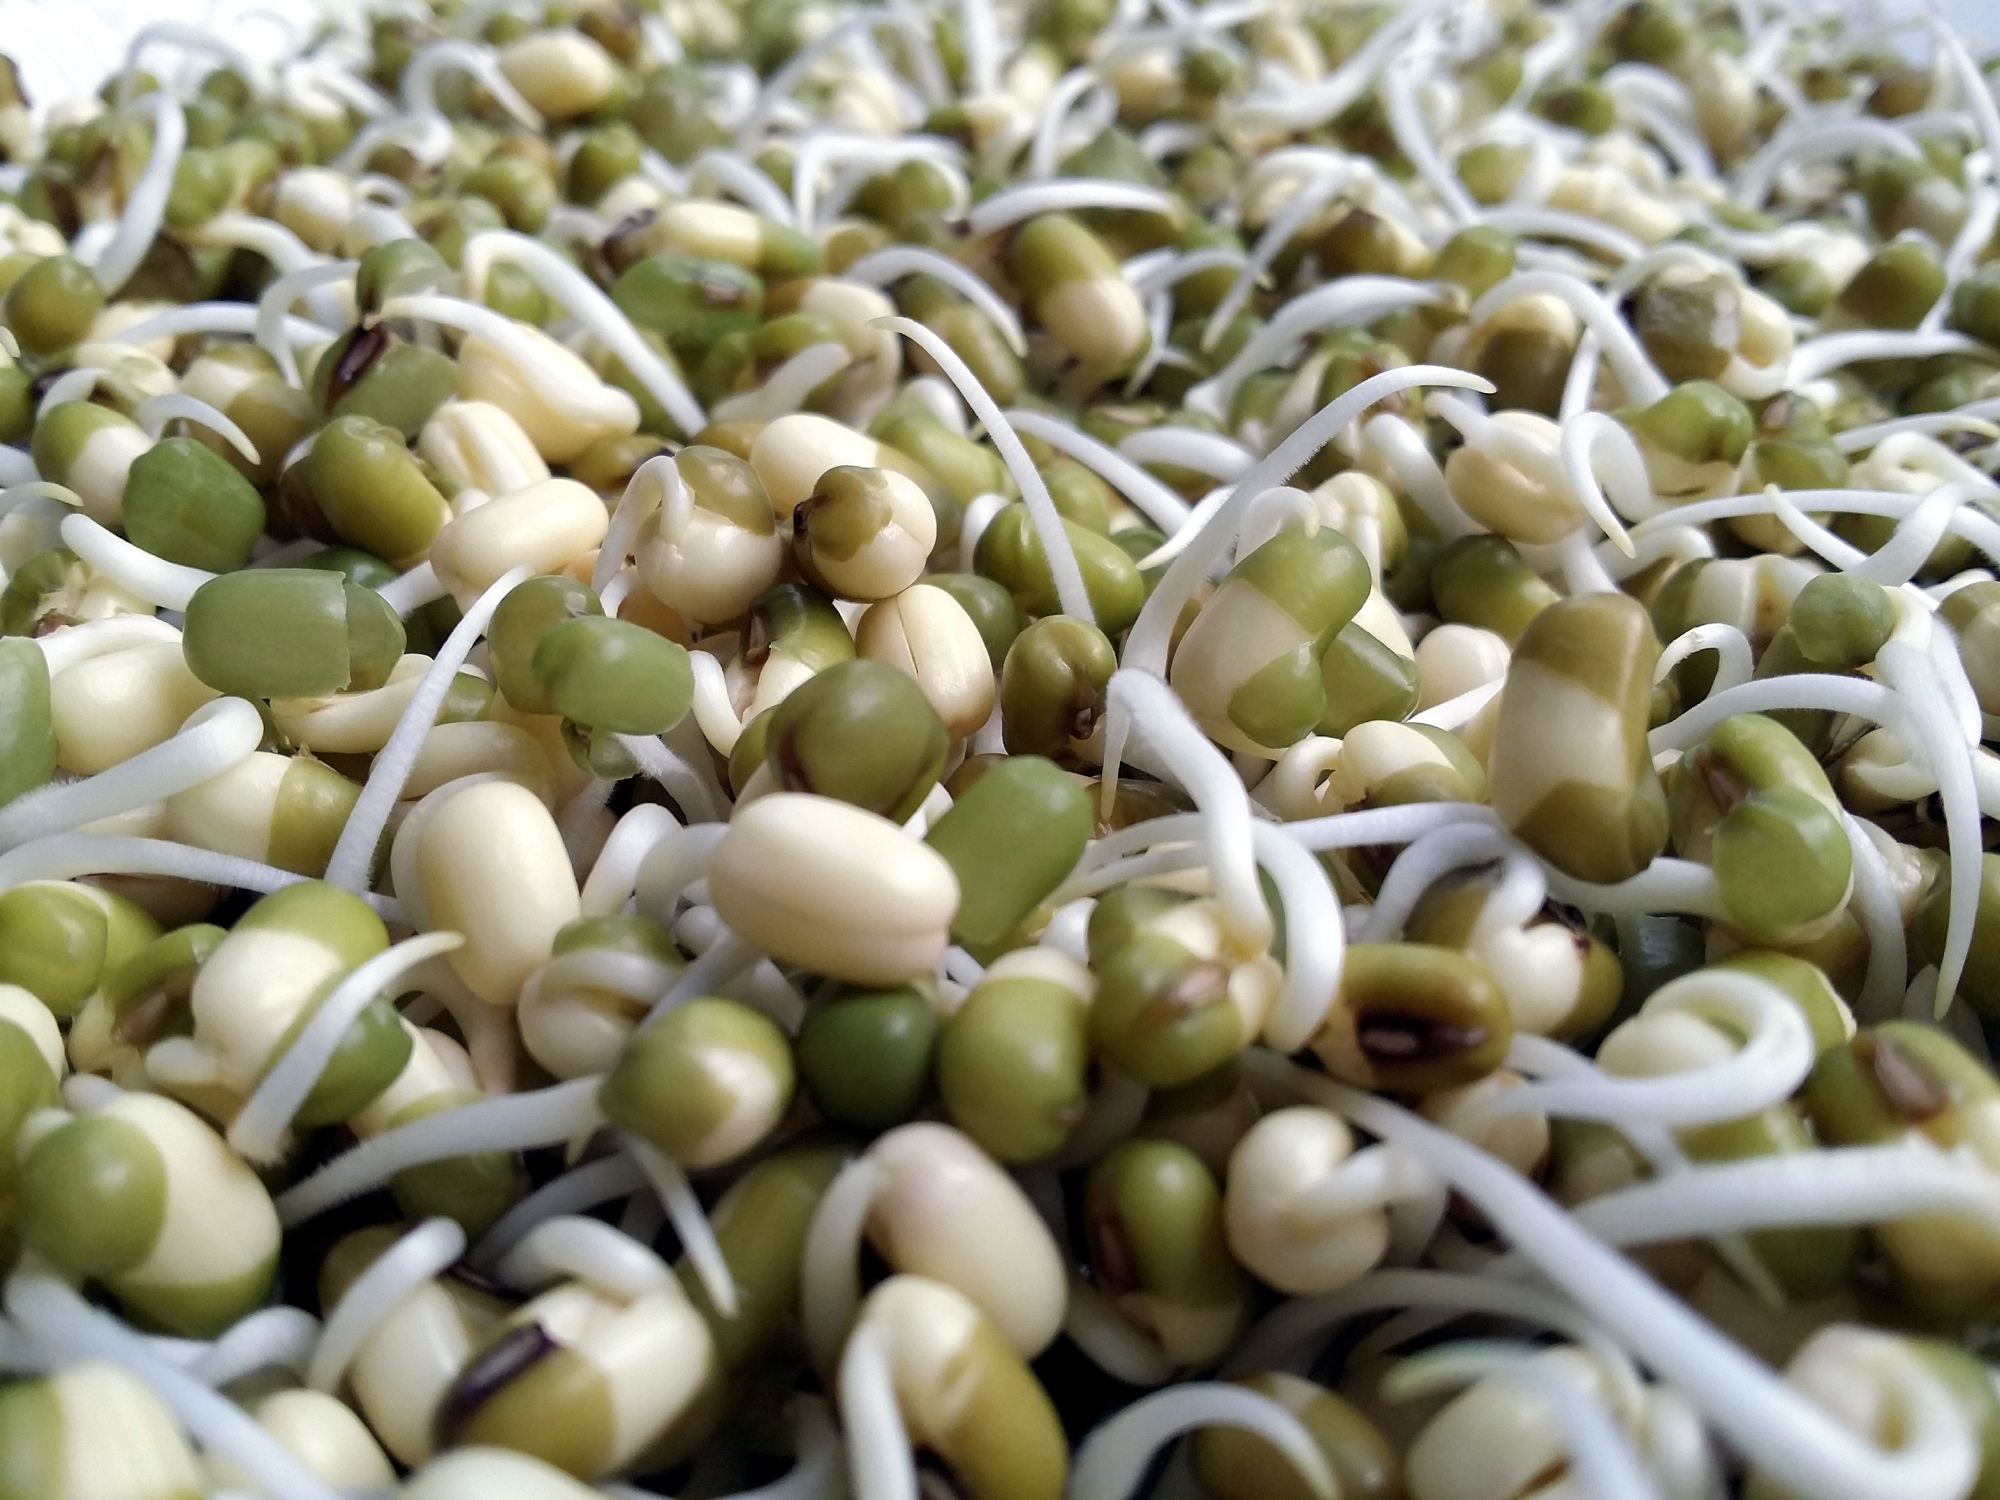 How to Sprout Beans, Grains and Seeds